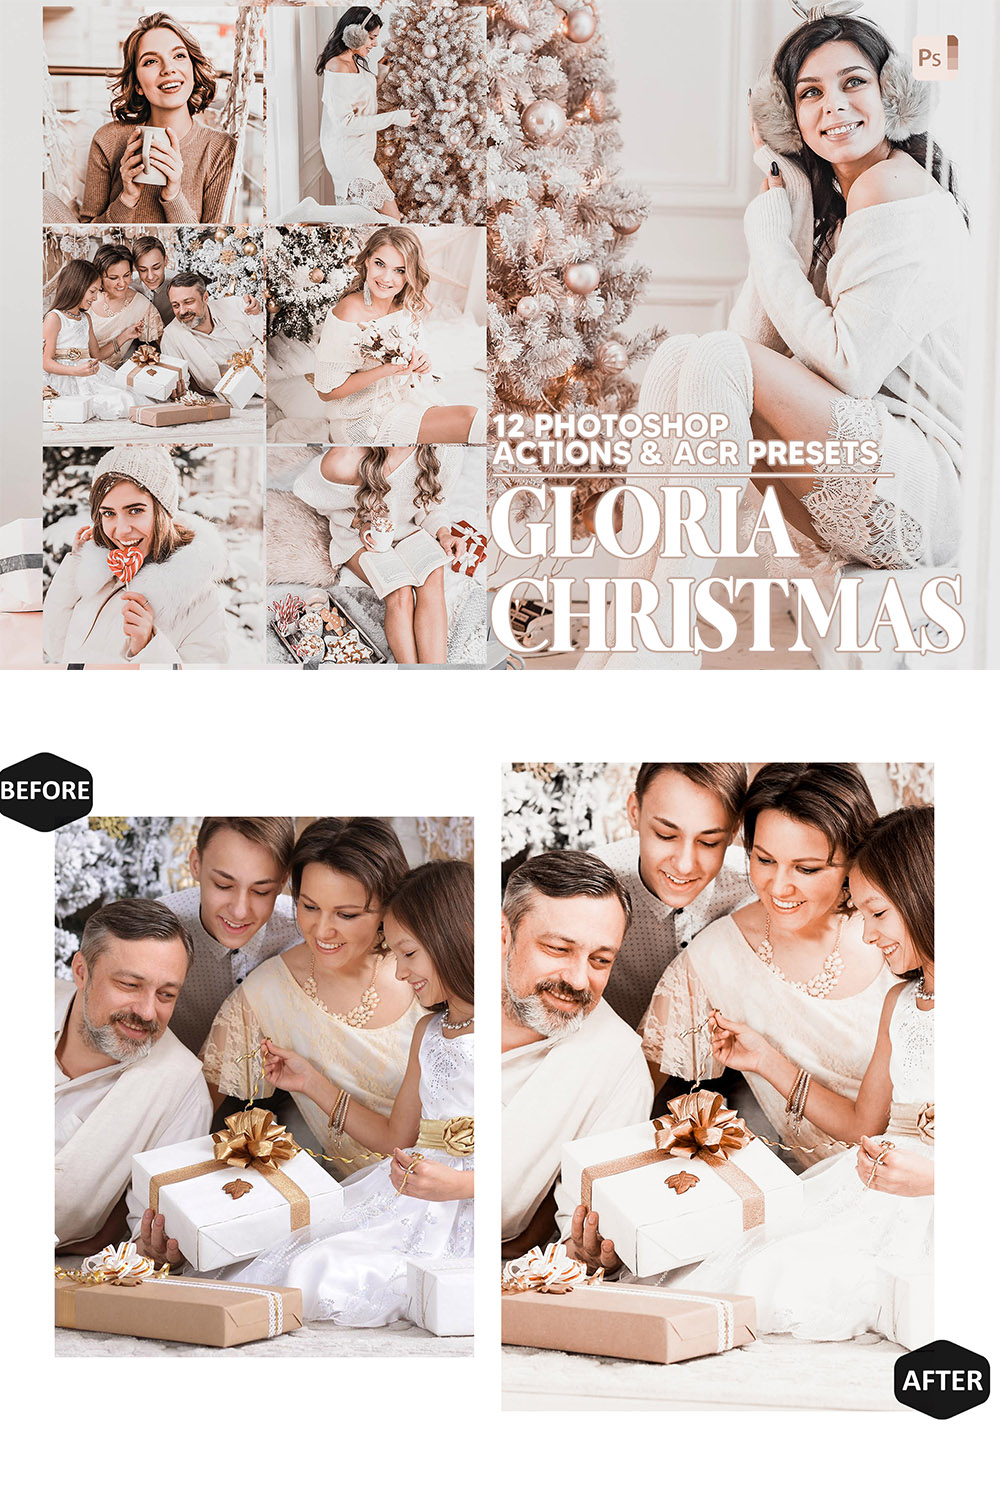 12 Photoshop Actions, Gloria Christmas Ps Action, White ACR Preset, Holiday Ps Filter, Atn Portrait And Lifestyle Theme For Instagram, Blogger pinterest preview image.